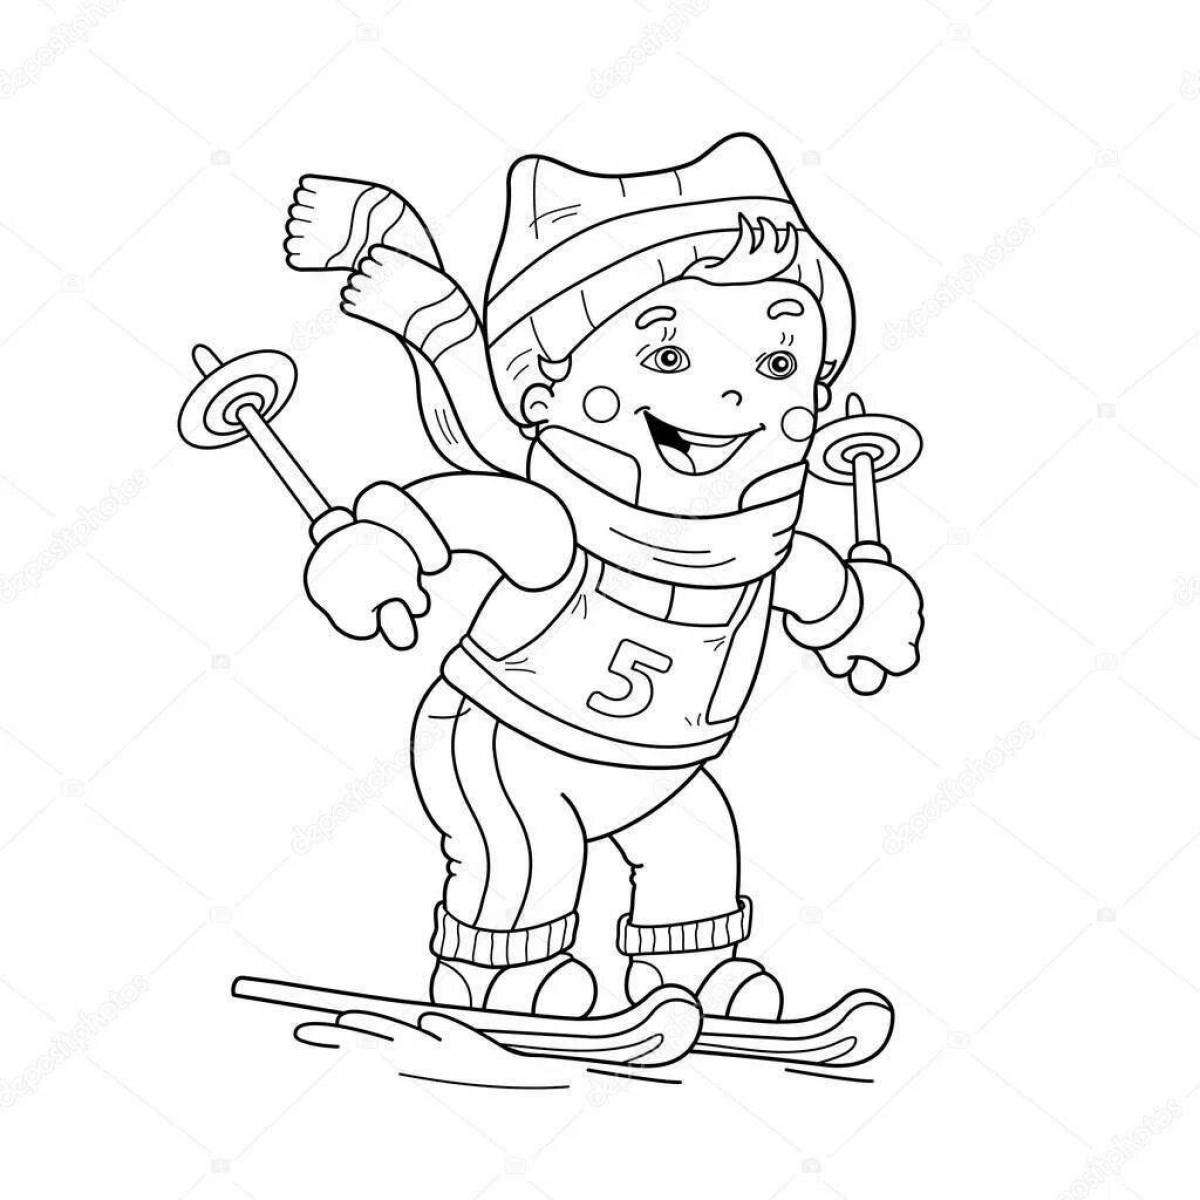 Shiny winter sports coloring page